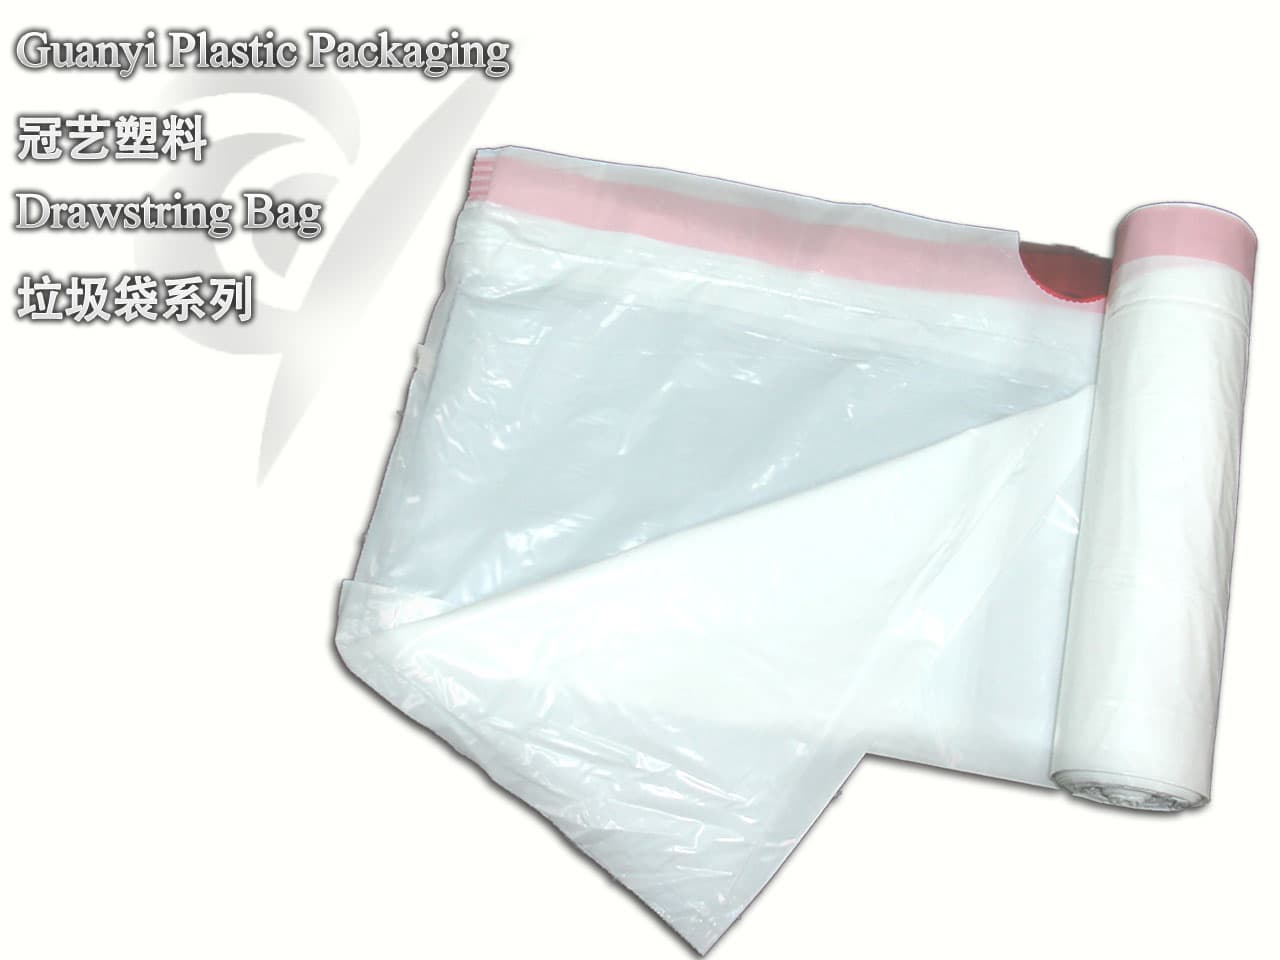 Kitchen Trash Bags White On Roll With Drawstring Handle